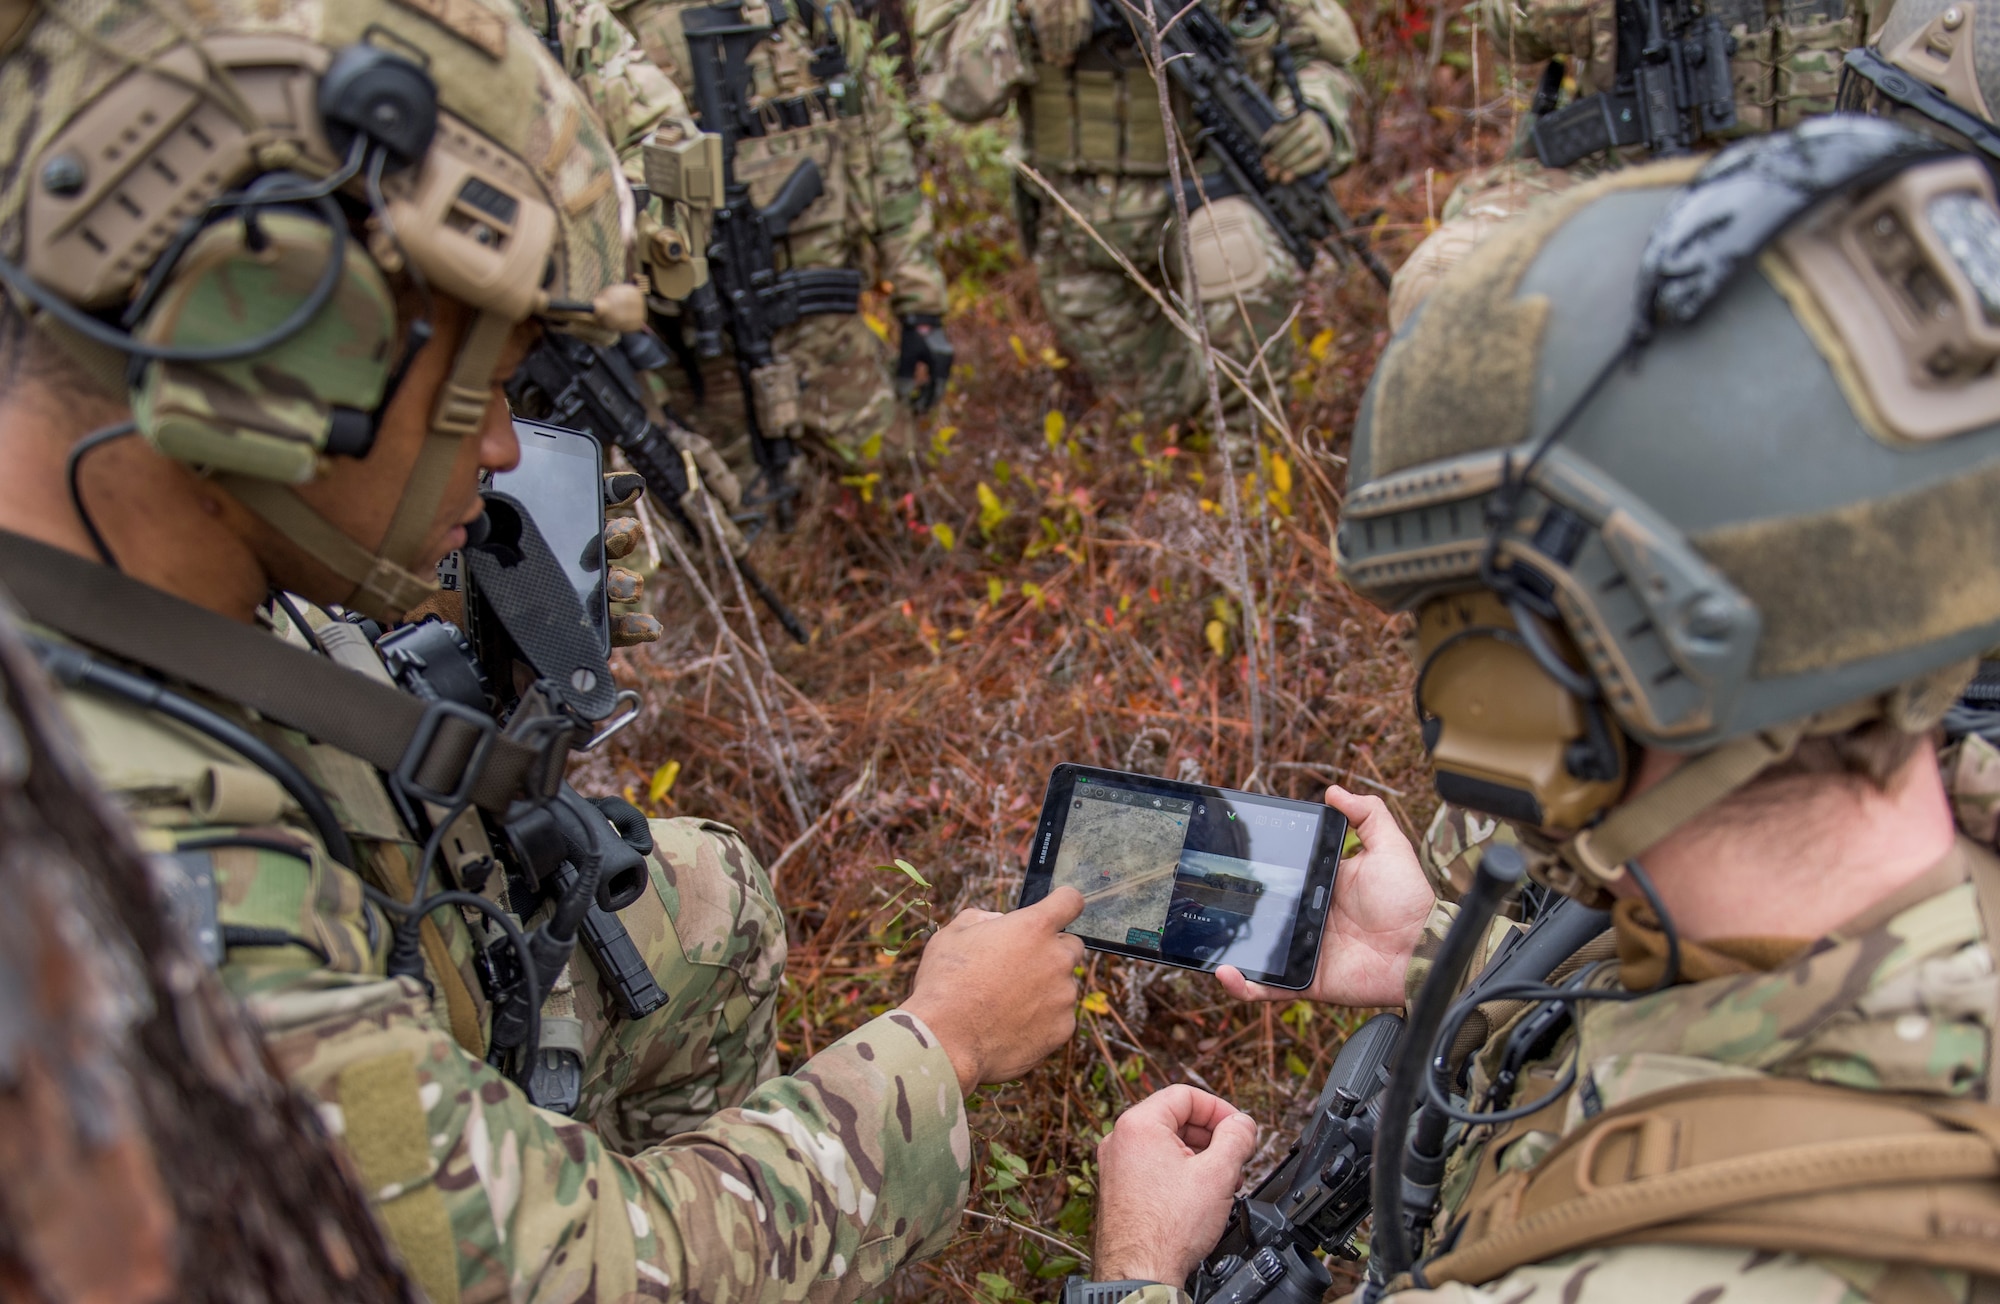 Members of the 6th Special Operations Squadron use a tablet to upload coordinates during an exercise showcasing the capabilities of the Advanced Battle Management System at Duke Field, Fla., Dec. 17, 2019. During the first demonstration of the ABMS, operators across the Air Force, Army, Navy and industry tested multiple real-time data sharing tools and technology in a homeland defense-based scenario enacted by U.S. Northern Command and enabled by Air Force senior leaders. The collection of networked systems and immediately available information is critical to enabling joint service operations across all domains. (U.S. Air Force photo by Tech. Sgt. Joshua J. Garcia)